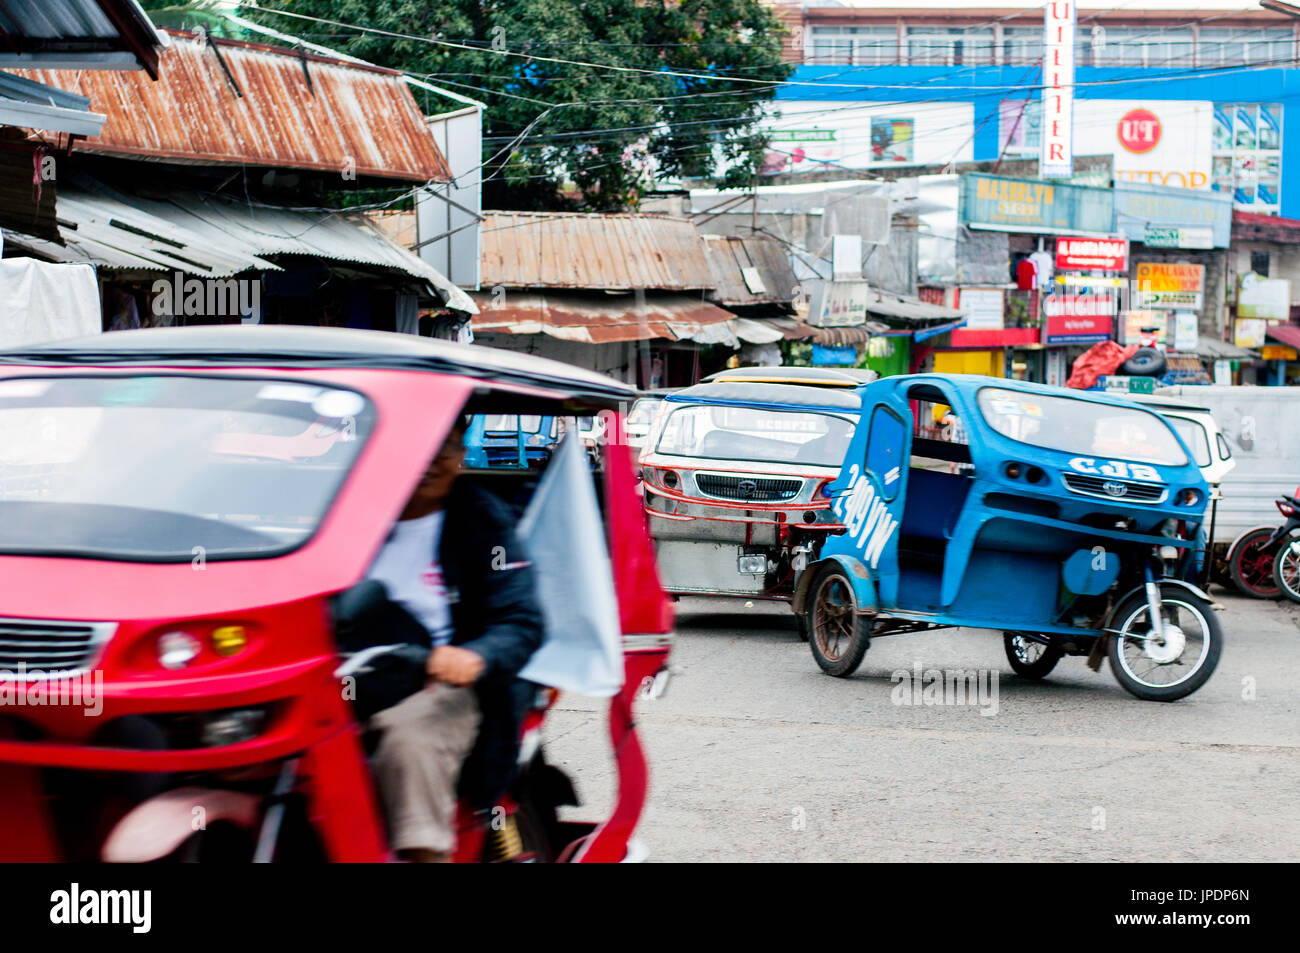 Street scene with tricycle taxis near market, Puerto Princesa, Palawan, Philippines Stock Photo